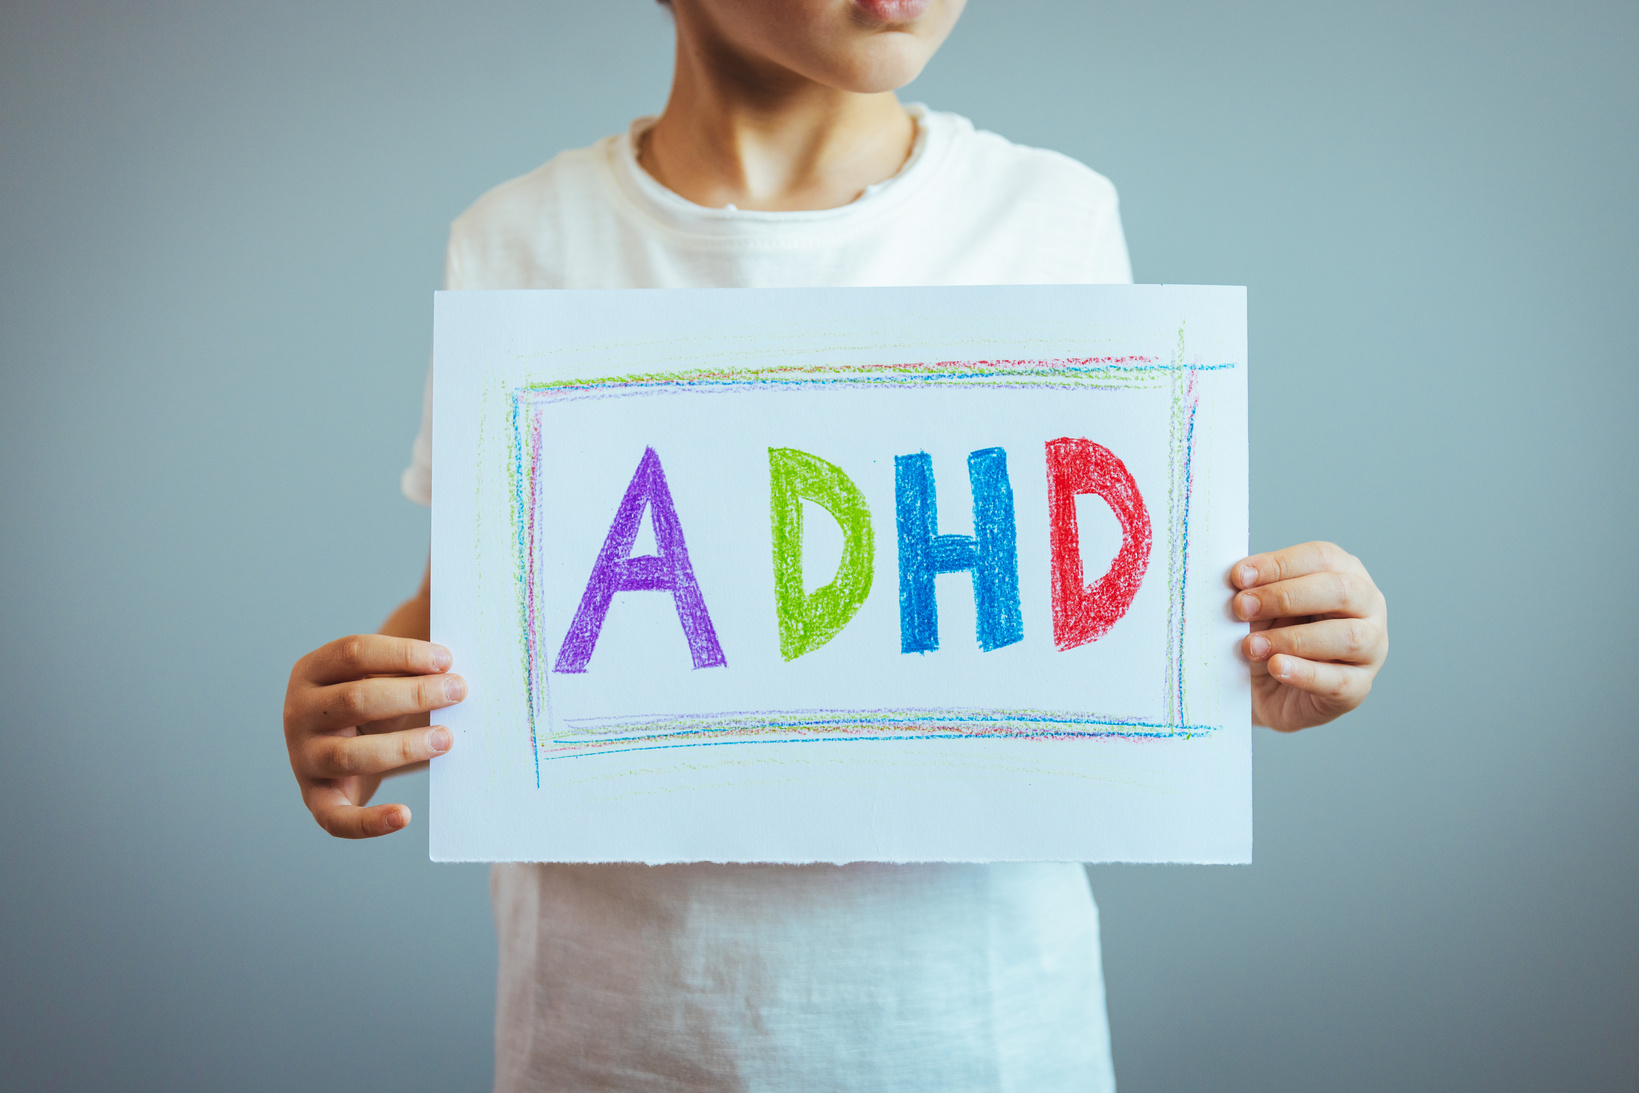 Young boy holds ADHD text written on sheet of paper.